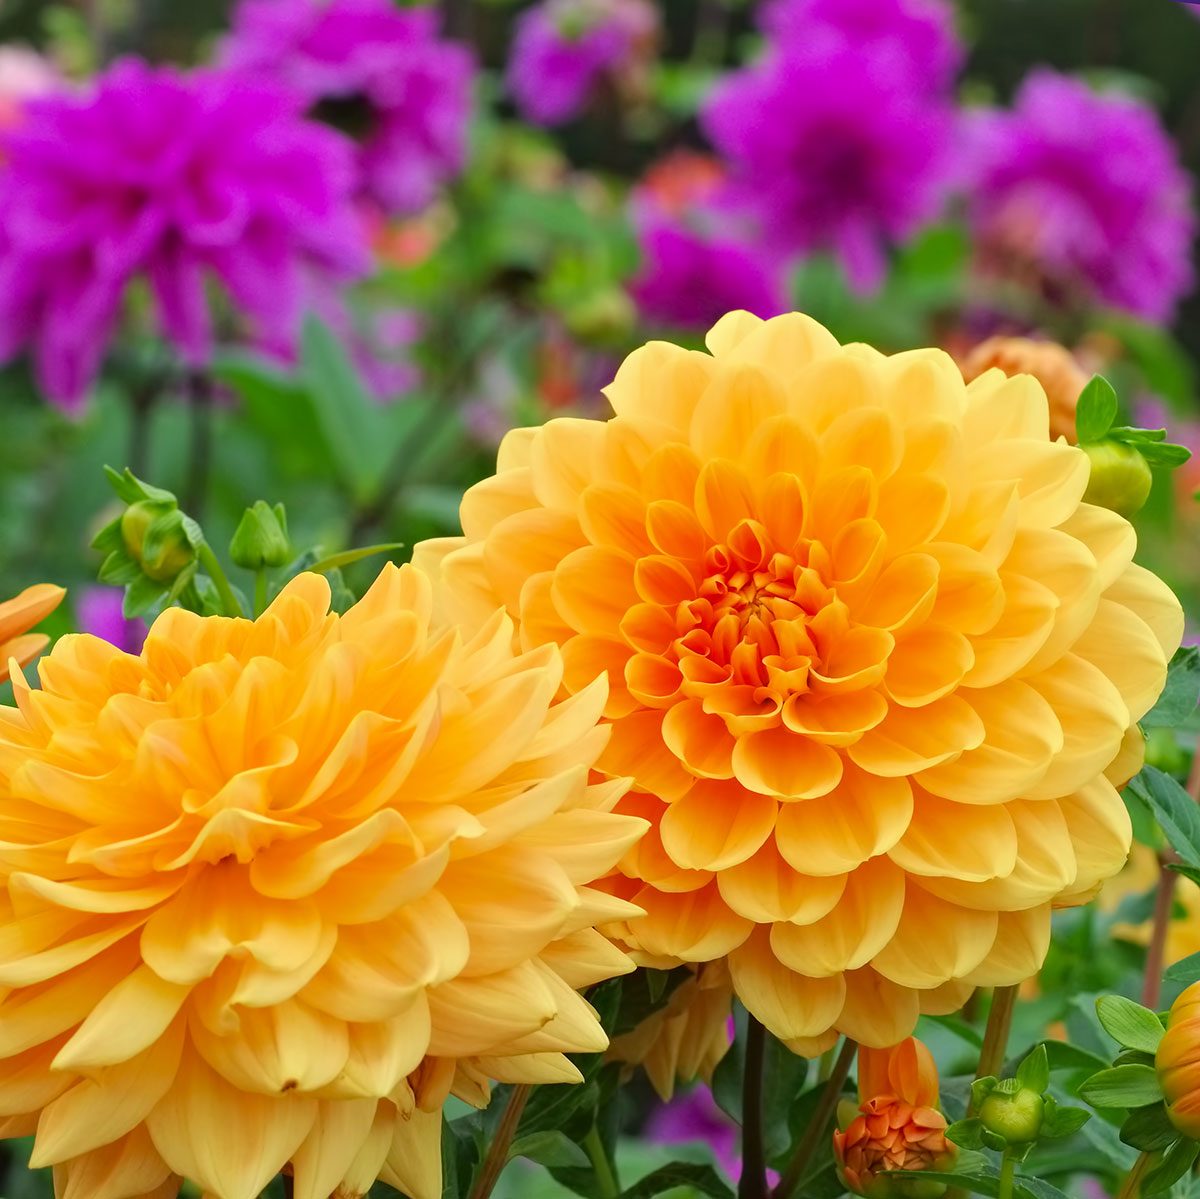 Golden Dahlia pictured in a garden with unknown purple and green plants in the out of focus background